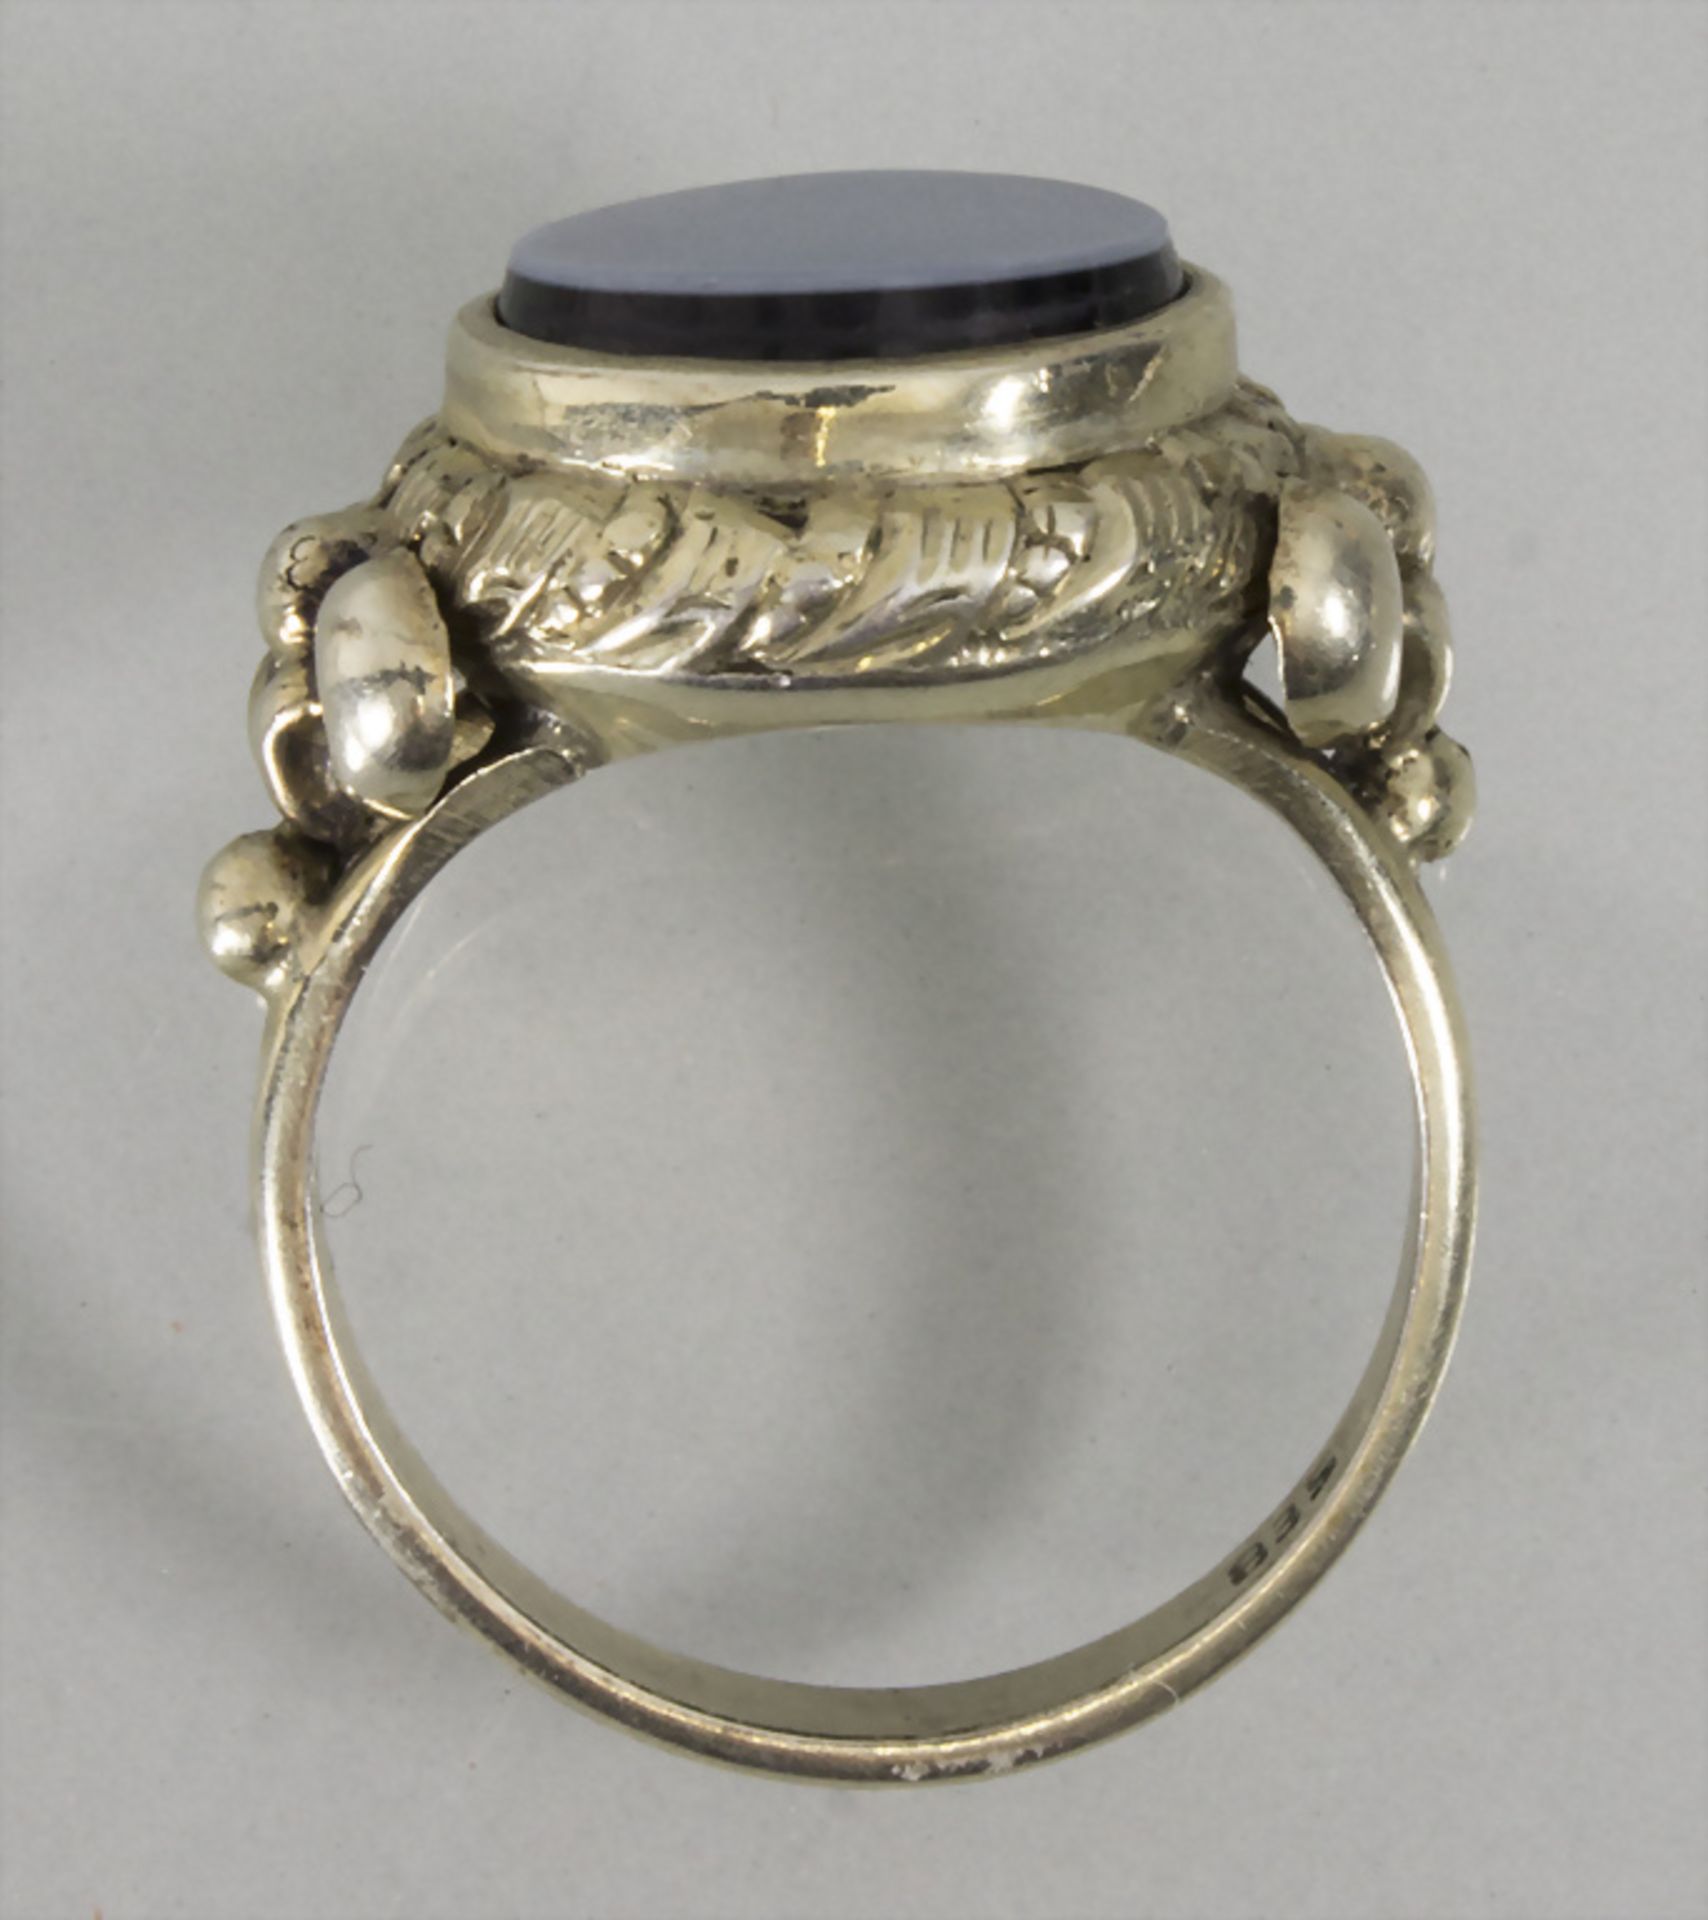 Damenring mit Achat / A gold washed silver ring with agate - Image 3 of 3